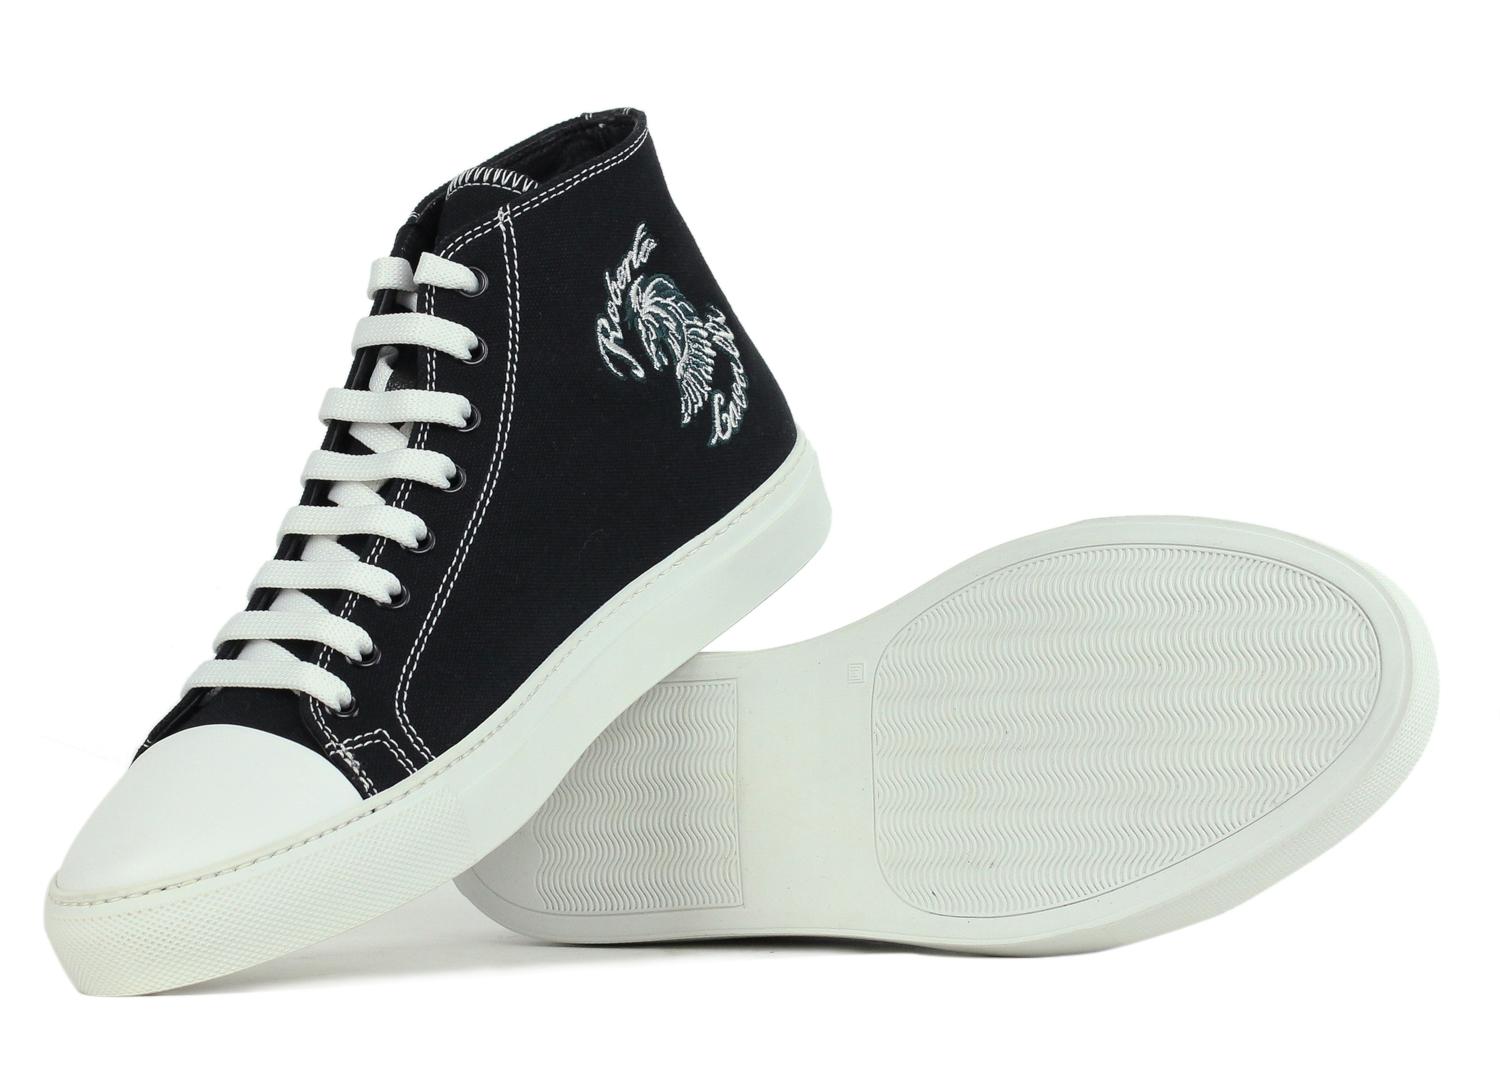 Men's Roberto Cavalli Mens Black Embroidered High Top Sneakers For Sale